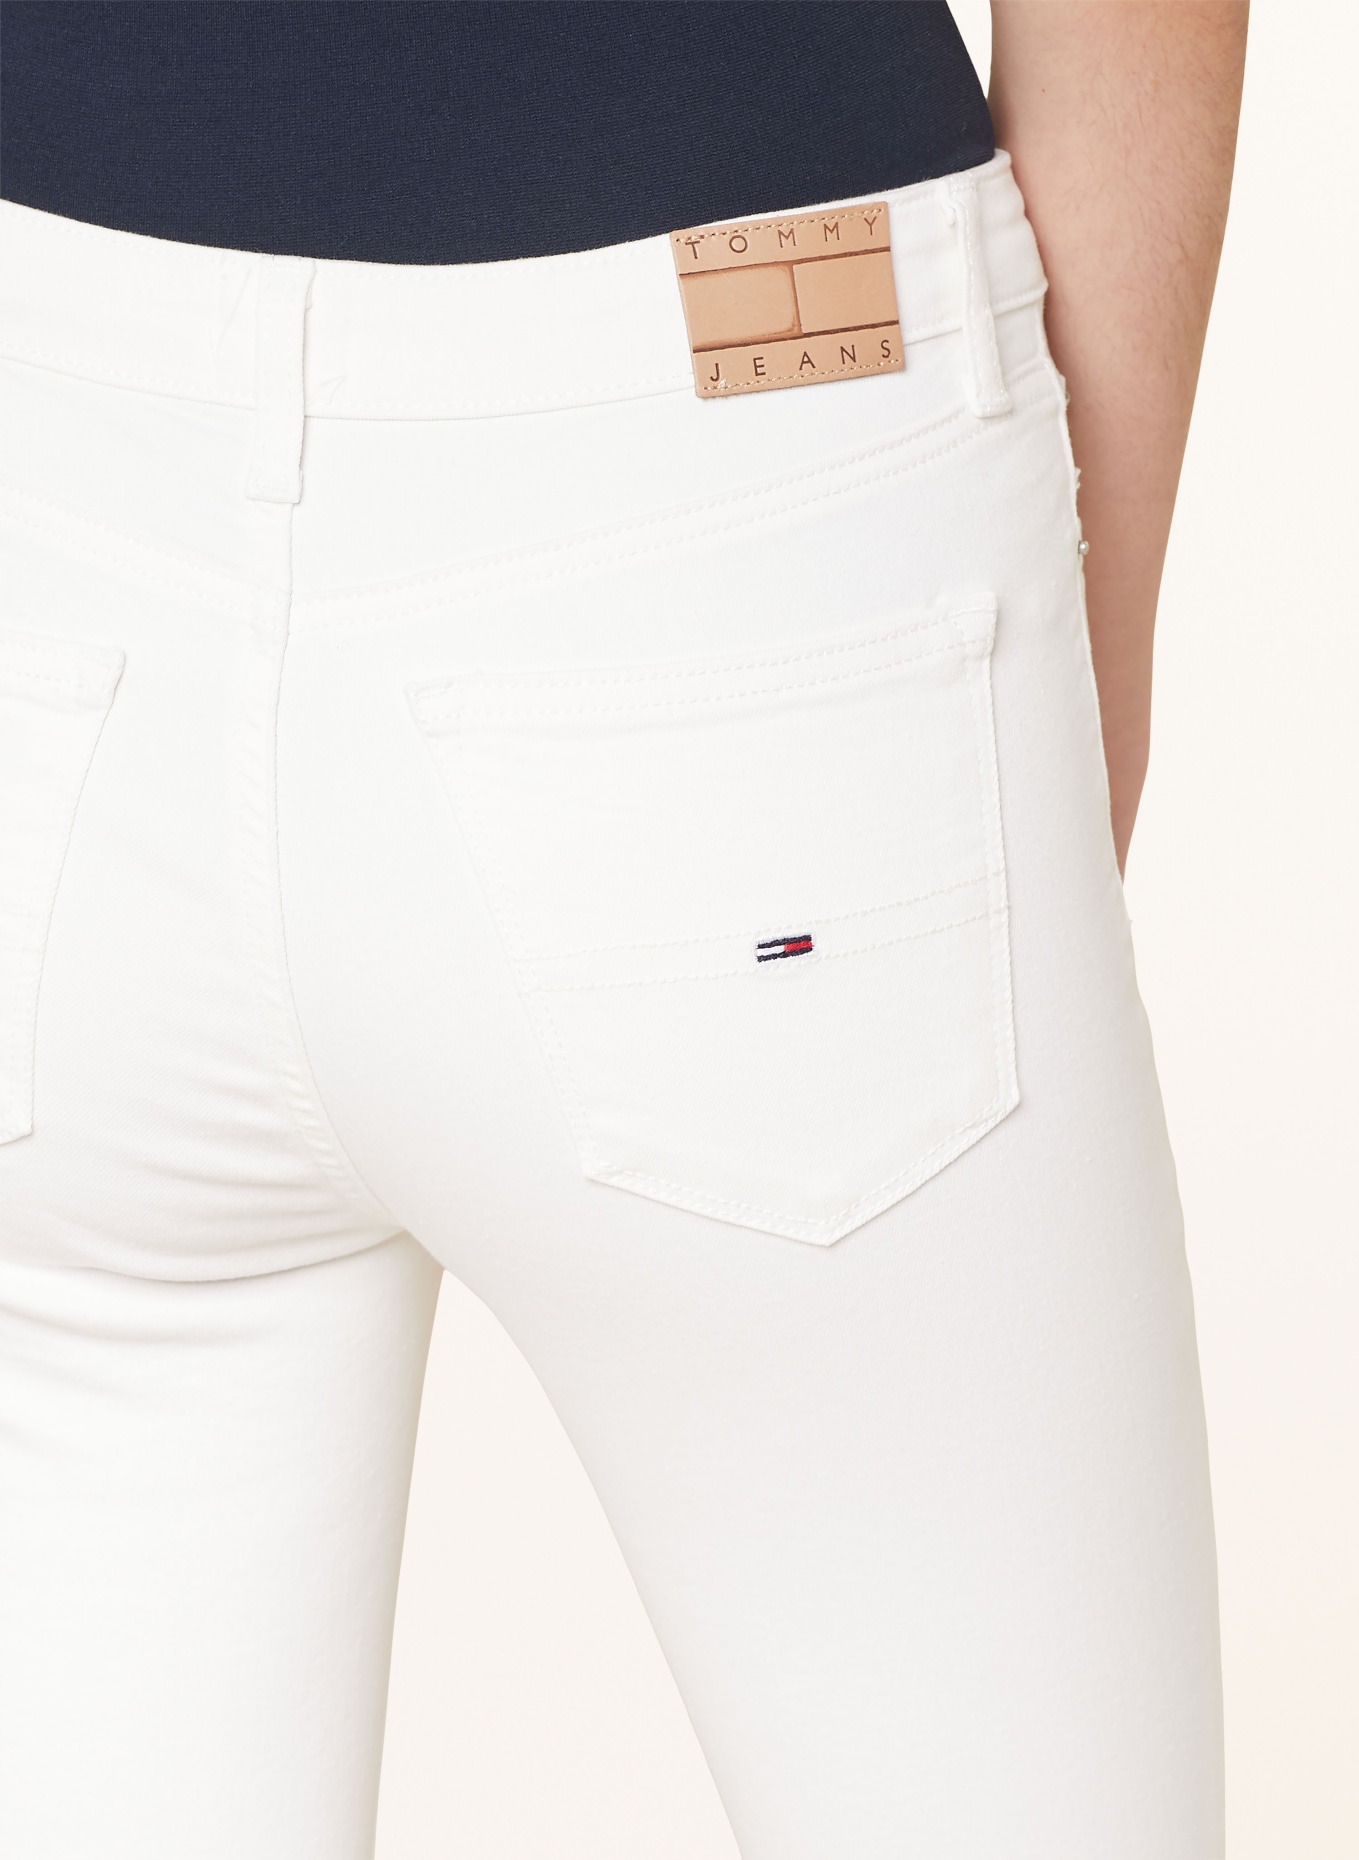 TOMMY JEANS Skinny Jeans NORA, Farbe: WEISS (Bild 5)